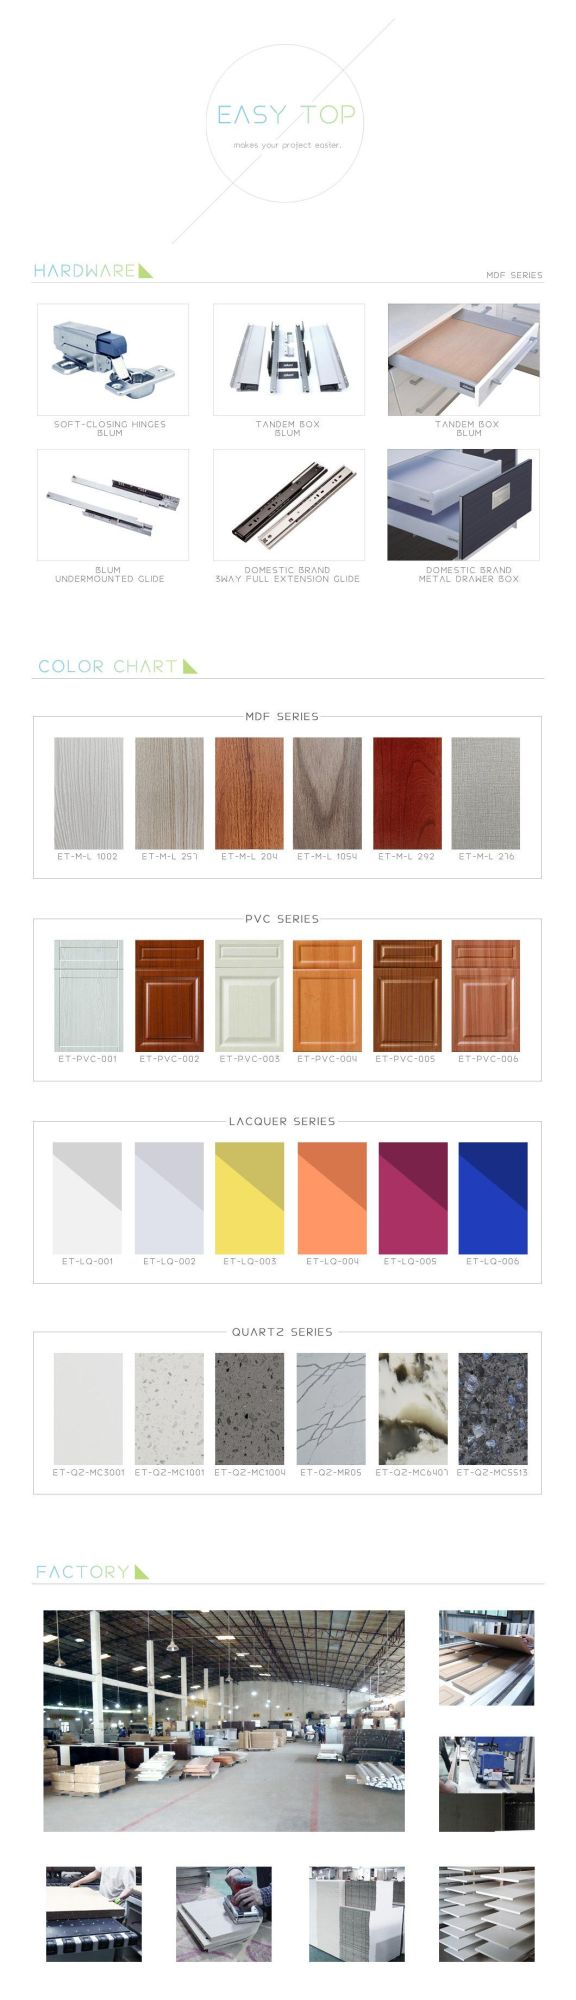 Simple Design Factory Customized Laminate Modular Complete Kitchen Units Filing Open Shelf Wood Safety Cabinets